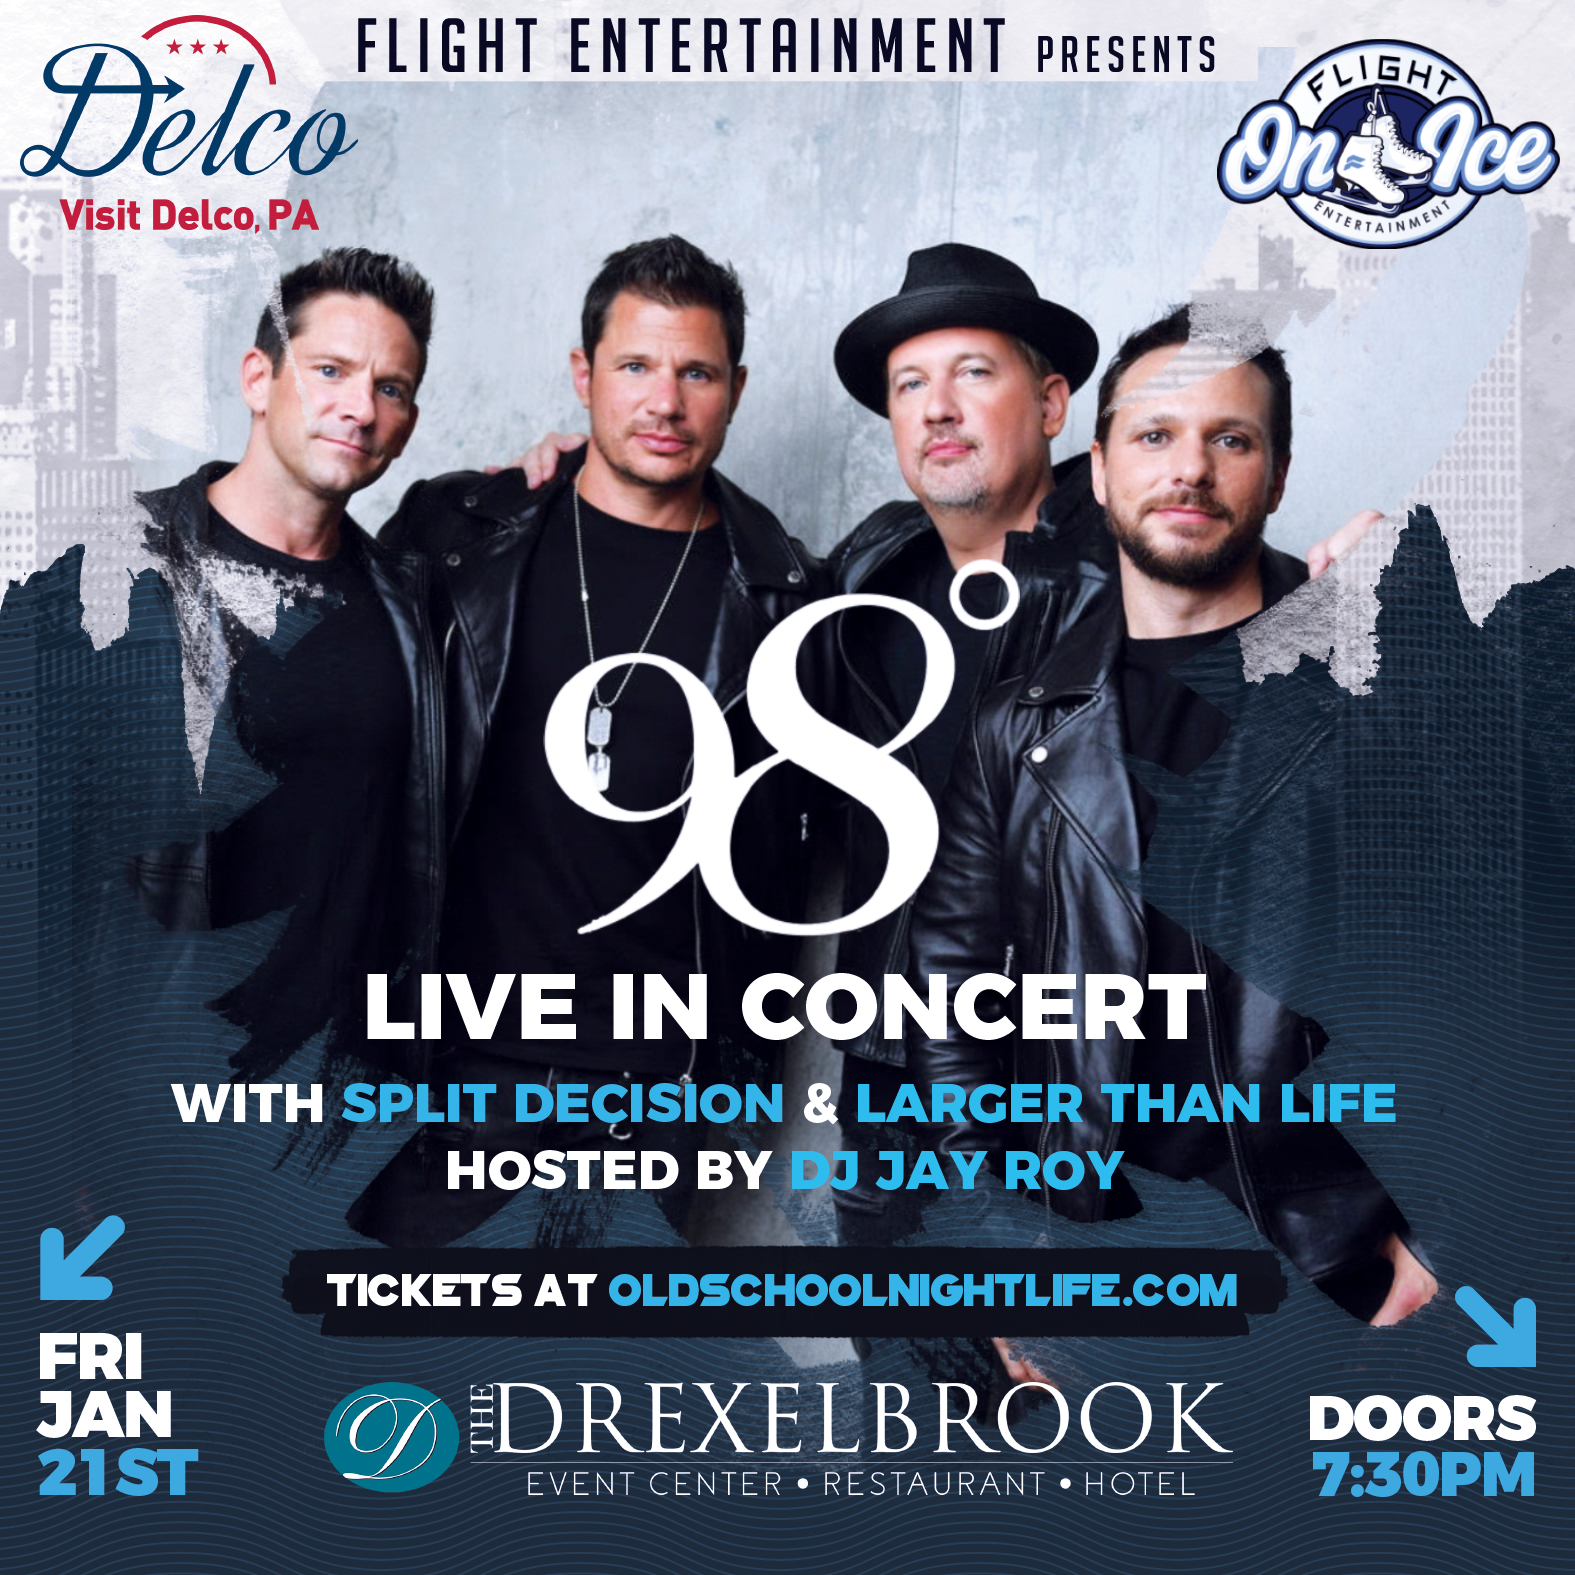 Buy Tickets to 98 Degrees Live in Concert in Drexel Hill on Jan 21, 2022